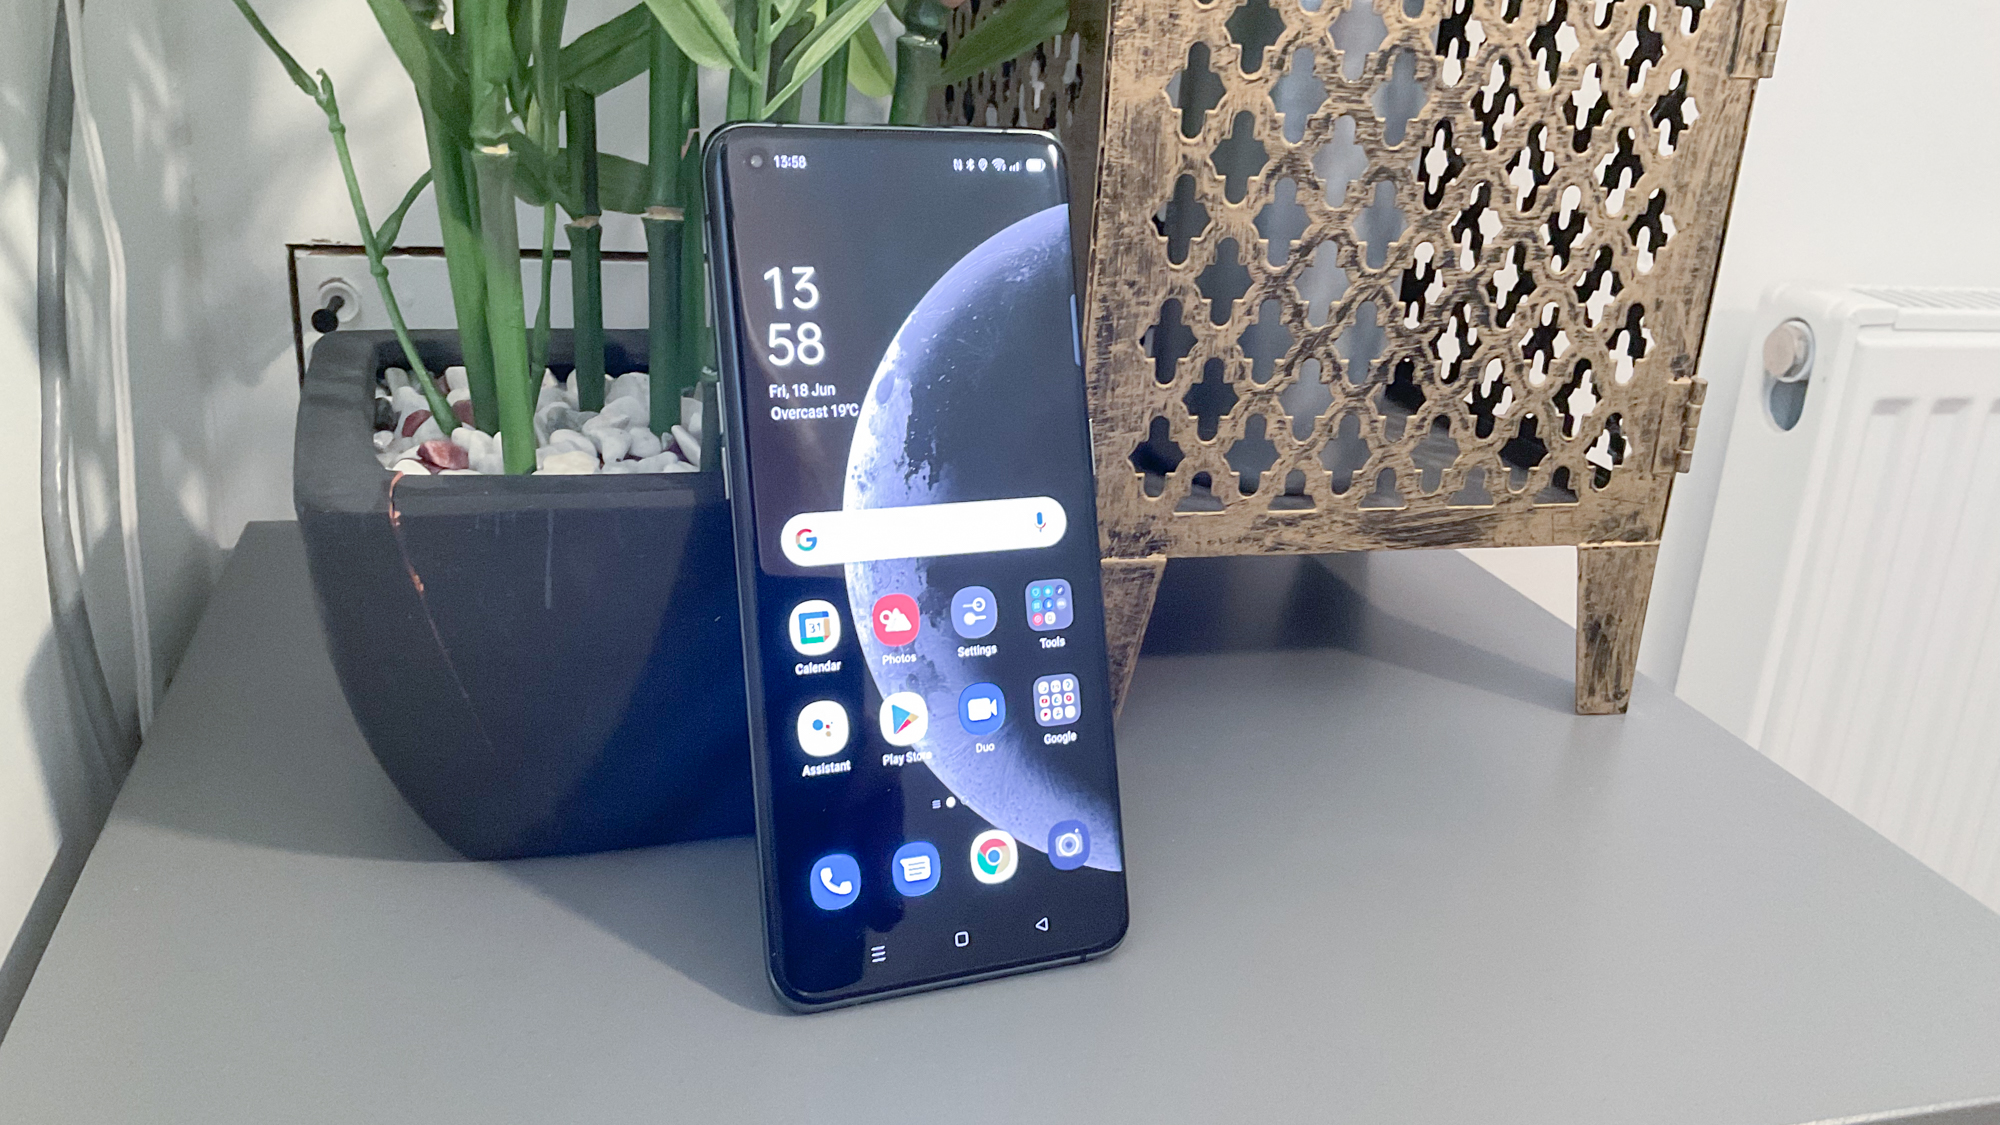 OPPO Find X3 Pro Hands-on Review: Premium Android that's Not a Galaxy